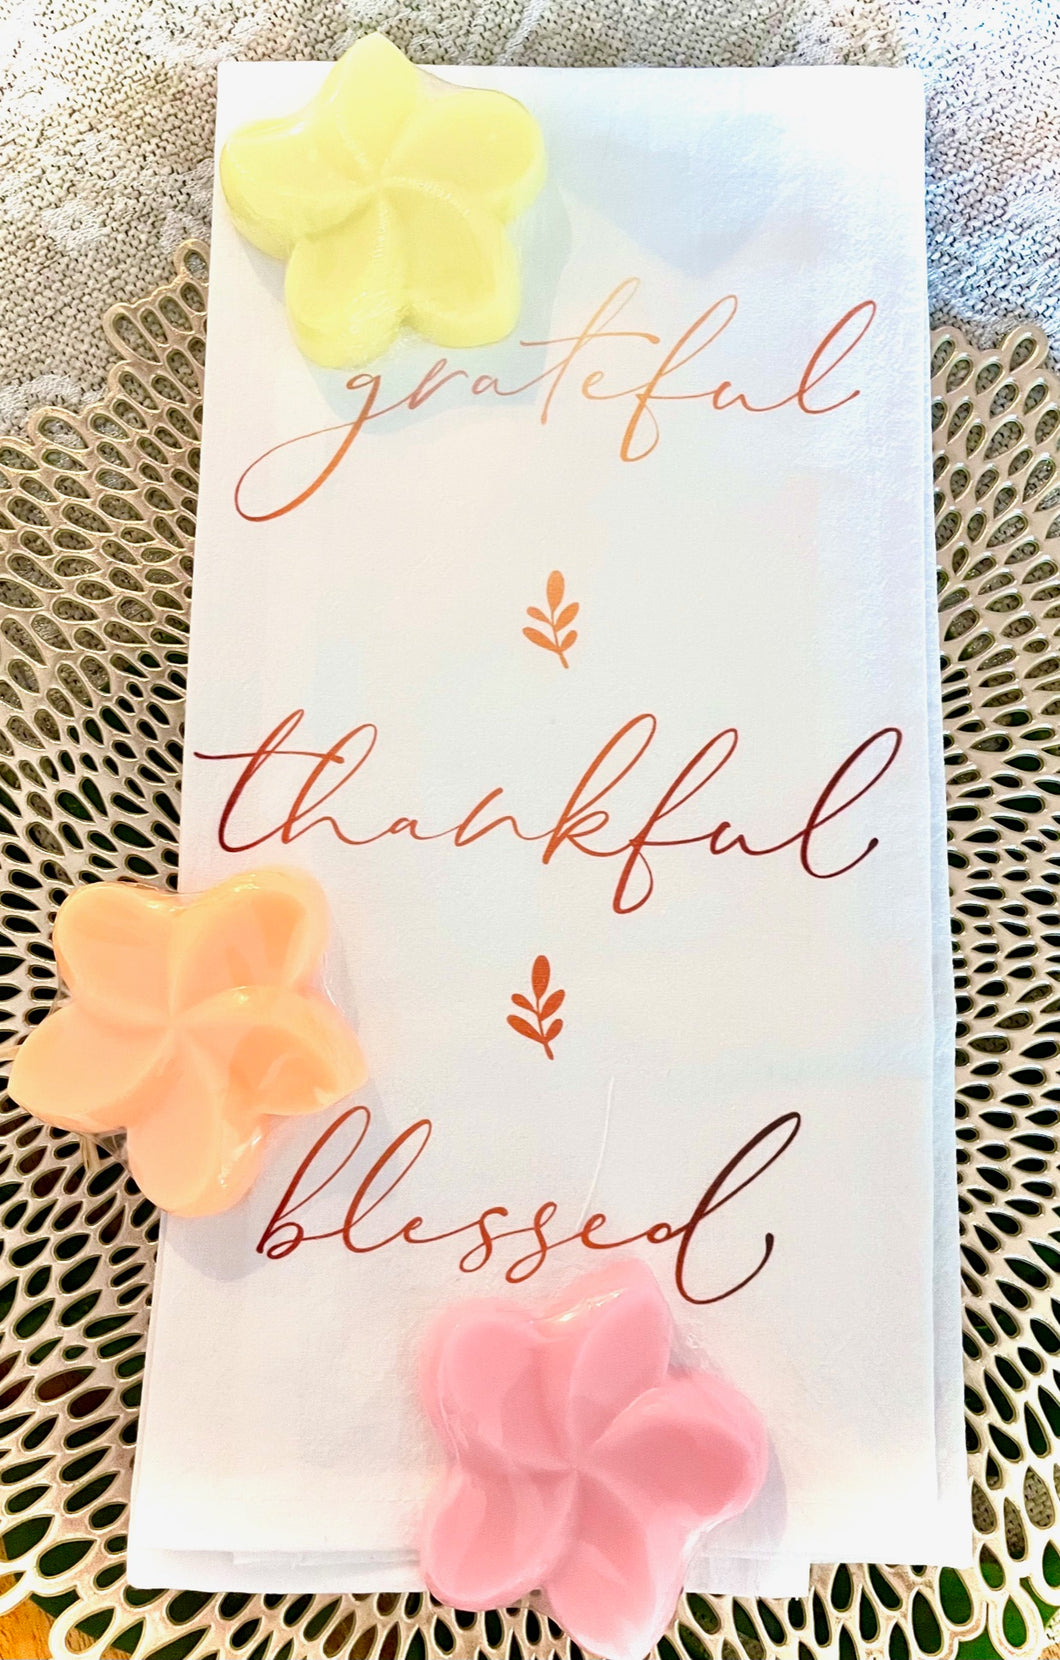 Grateful, Thankful, Blessed Hand Towel & Soap Gift Set